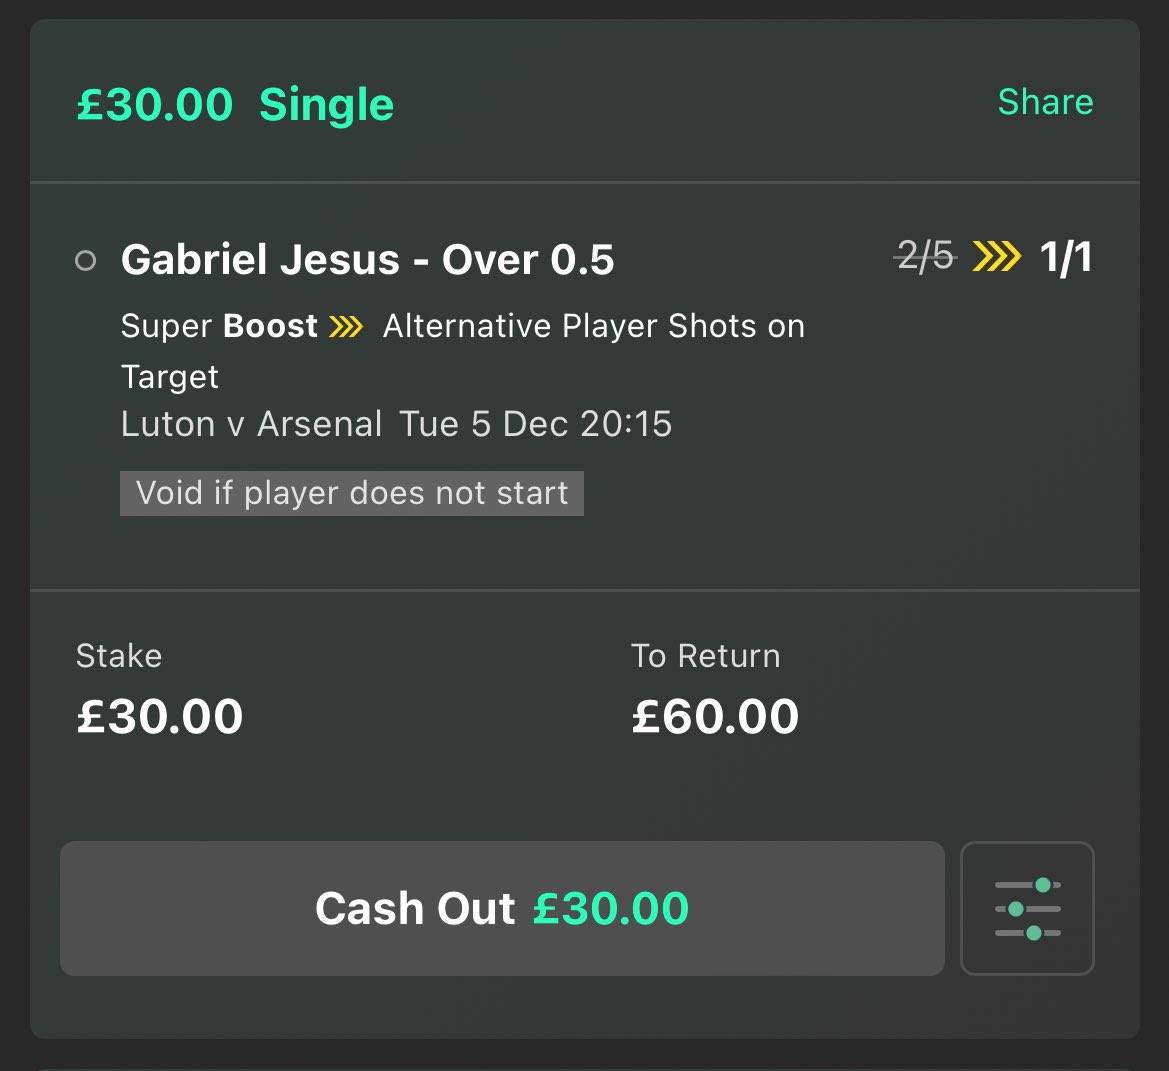 😍 £60 FREE CASH GIVEAWAY! If Gabriel Jesus has a shot on target for Arsenal vs Luton, we’ll give away £60! 👉 One entry if you LIKE this tweet. 👉 One entry if you RETWEET this tweet. Must be following us, good luck!